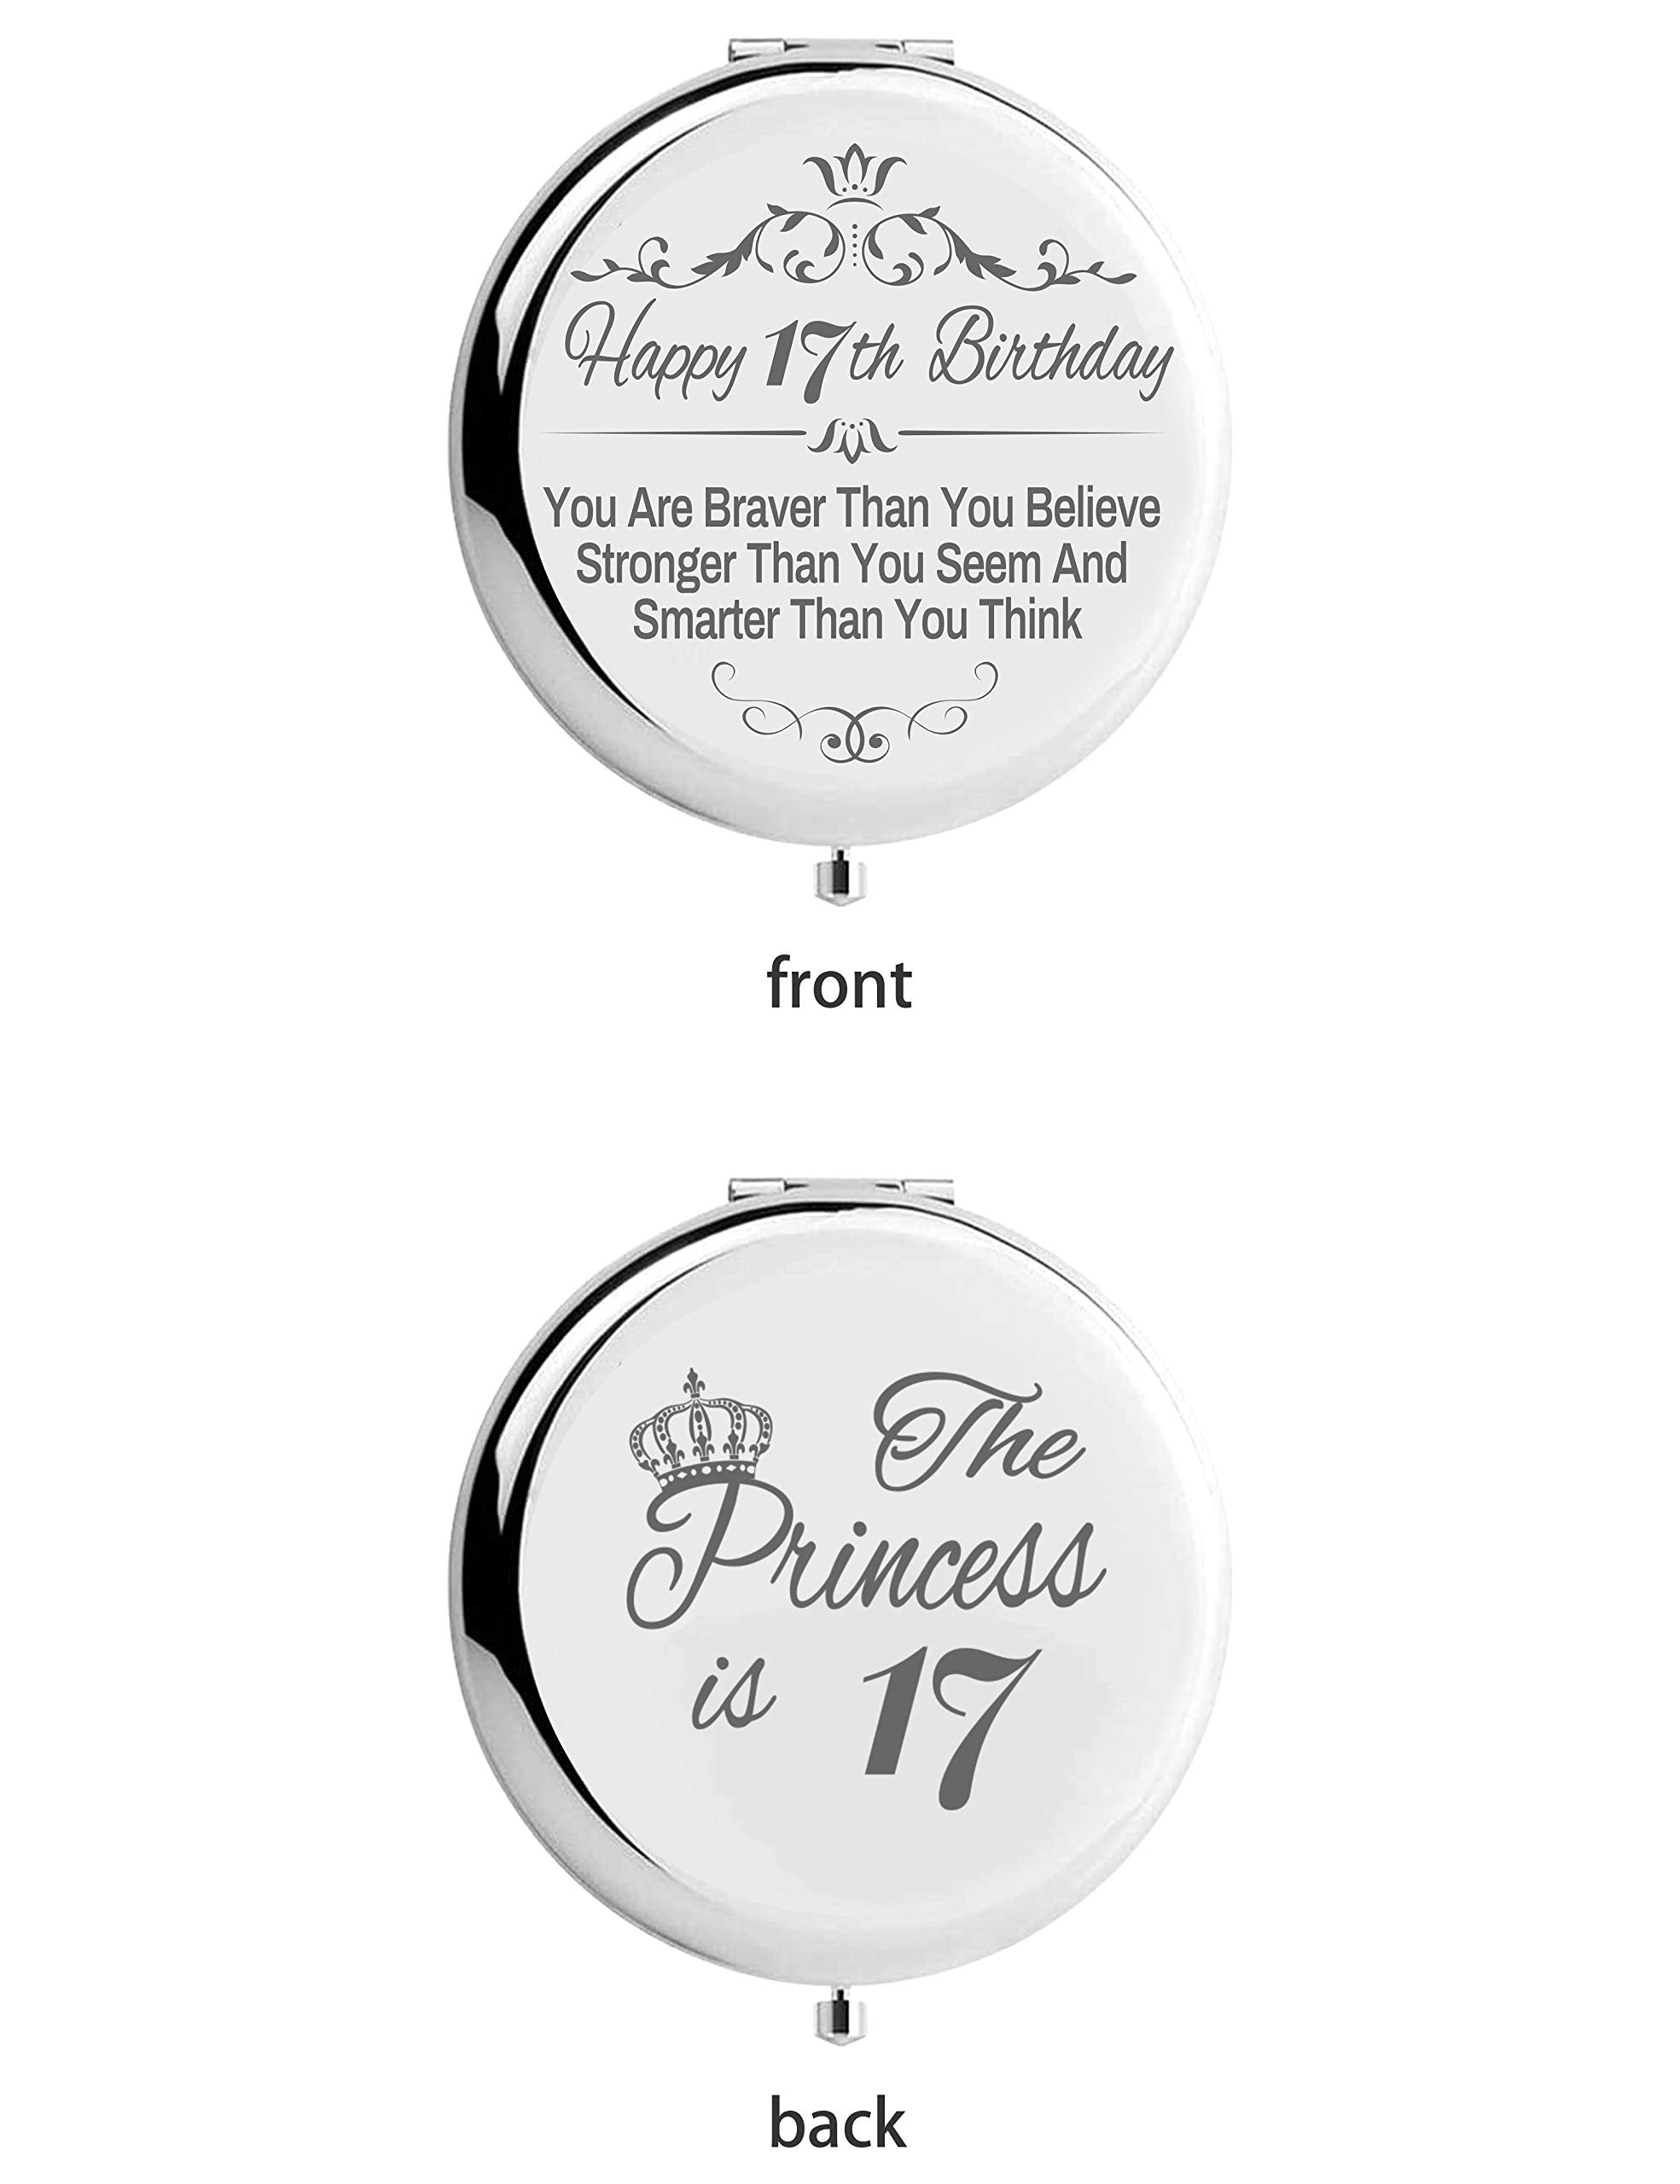 17th Birthday Gifts for Girls, 17 Year Old Girl Gift Ideas, Gifts